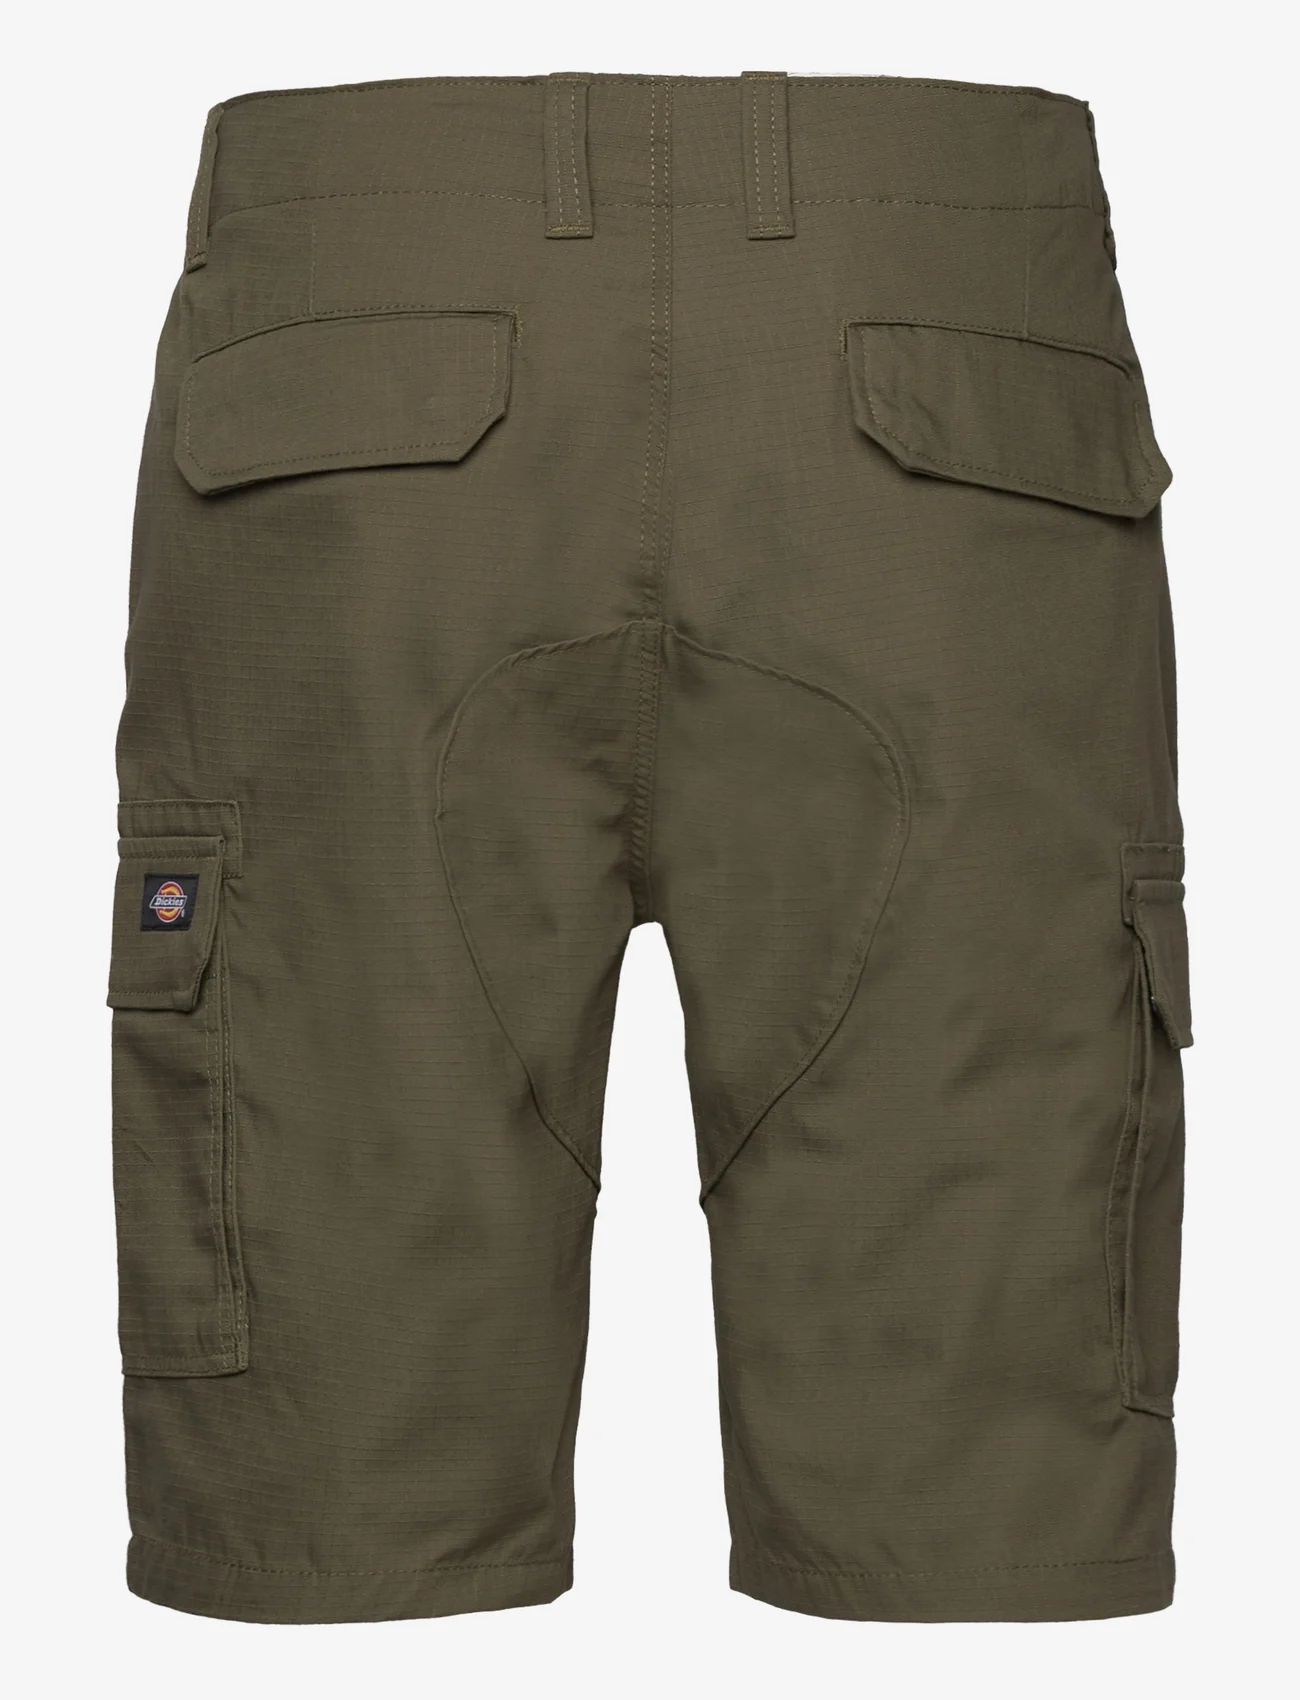 Dickies - MILLERVILLE SHORT - shorts - military gr - 1